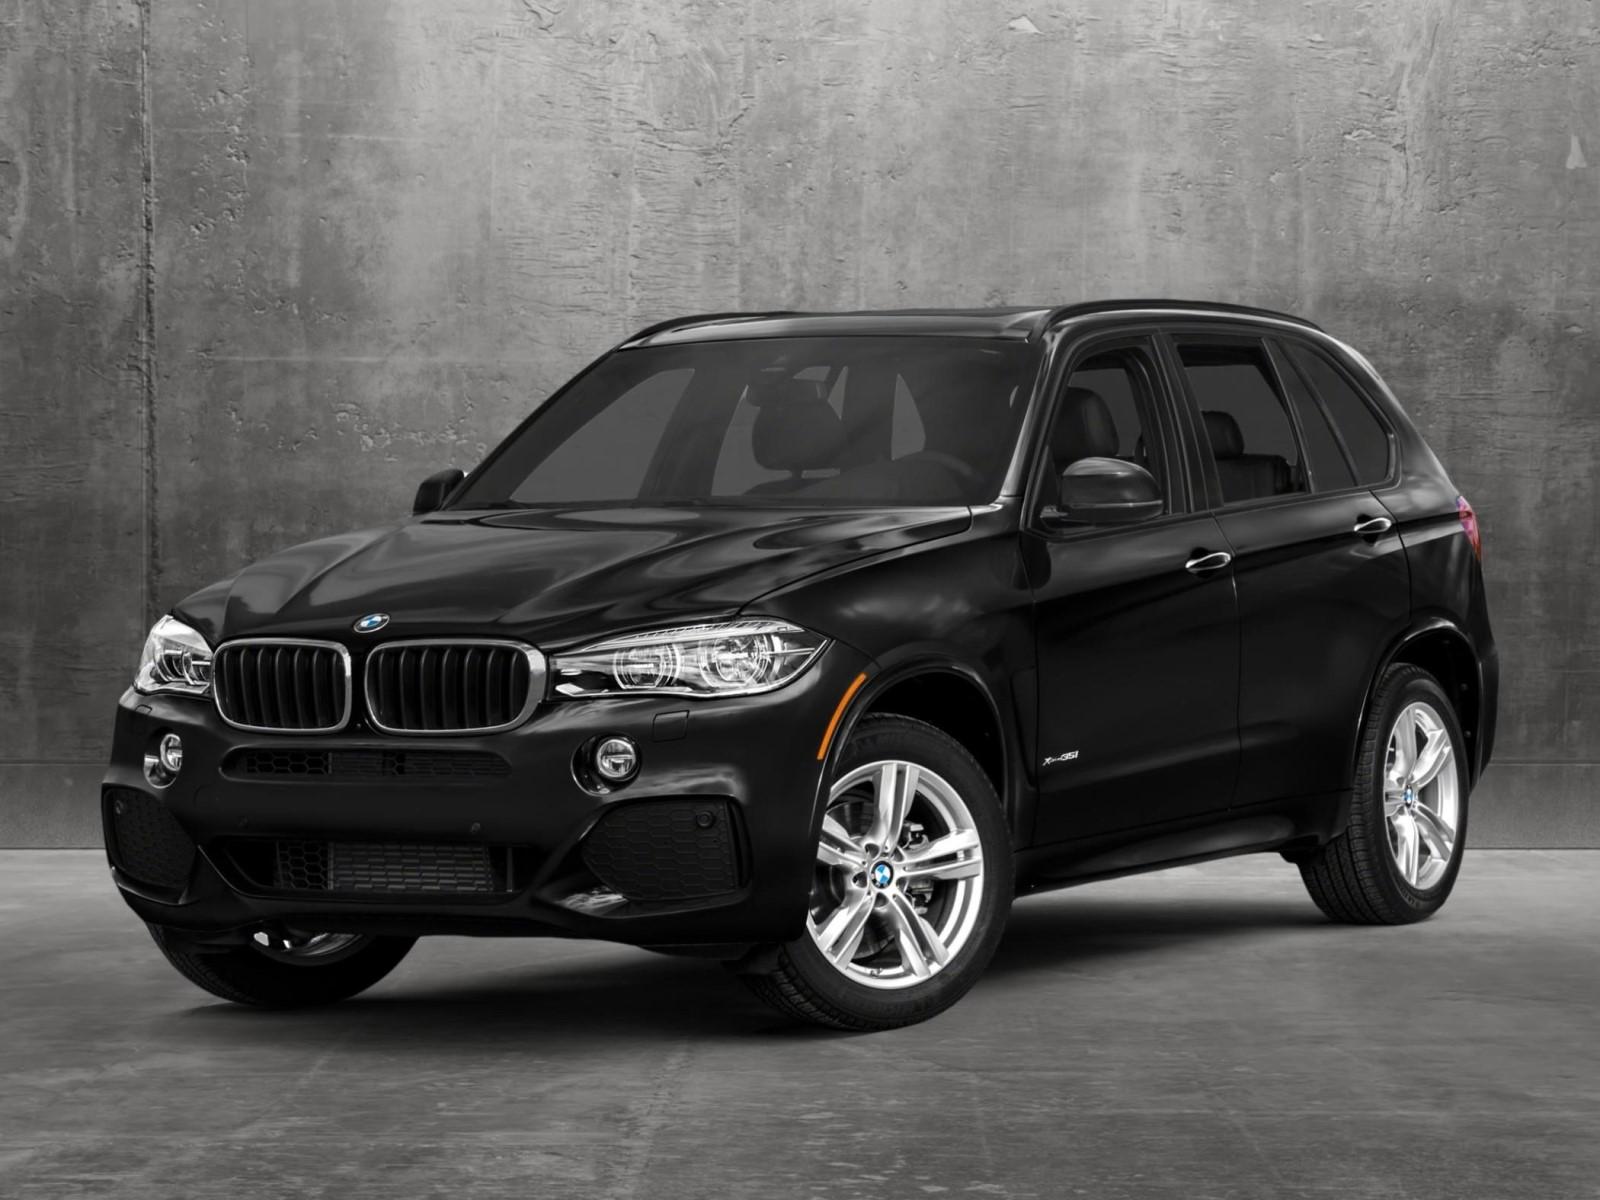 2017 BMW X5 xDrive35d Vehicle Photo in Rockville, MD 20852